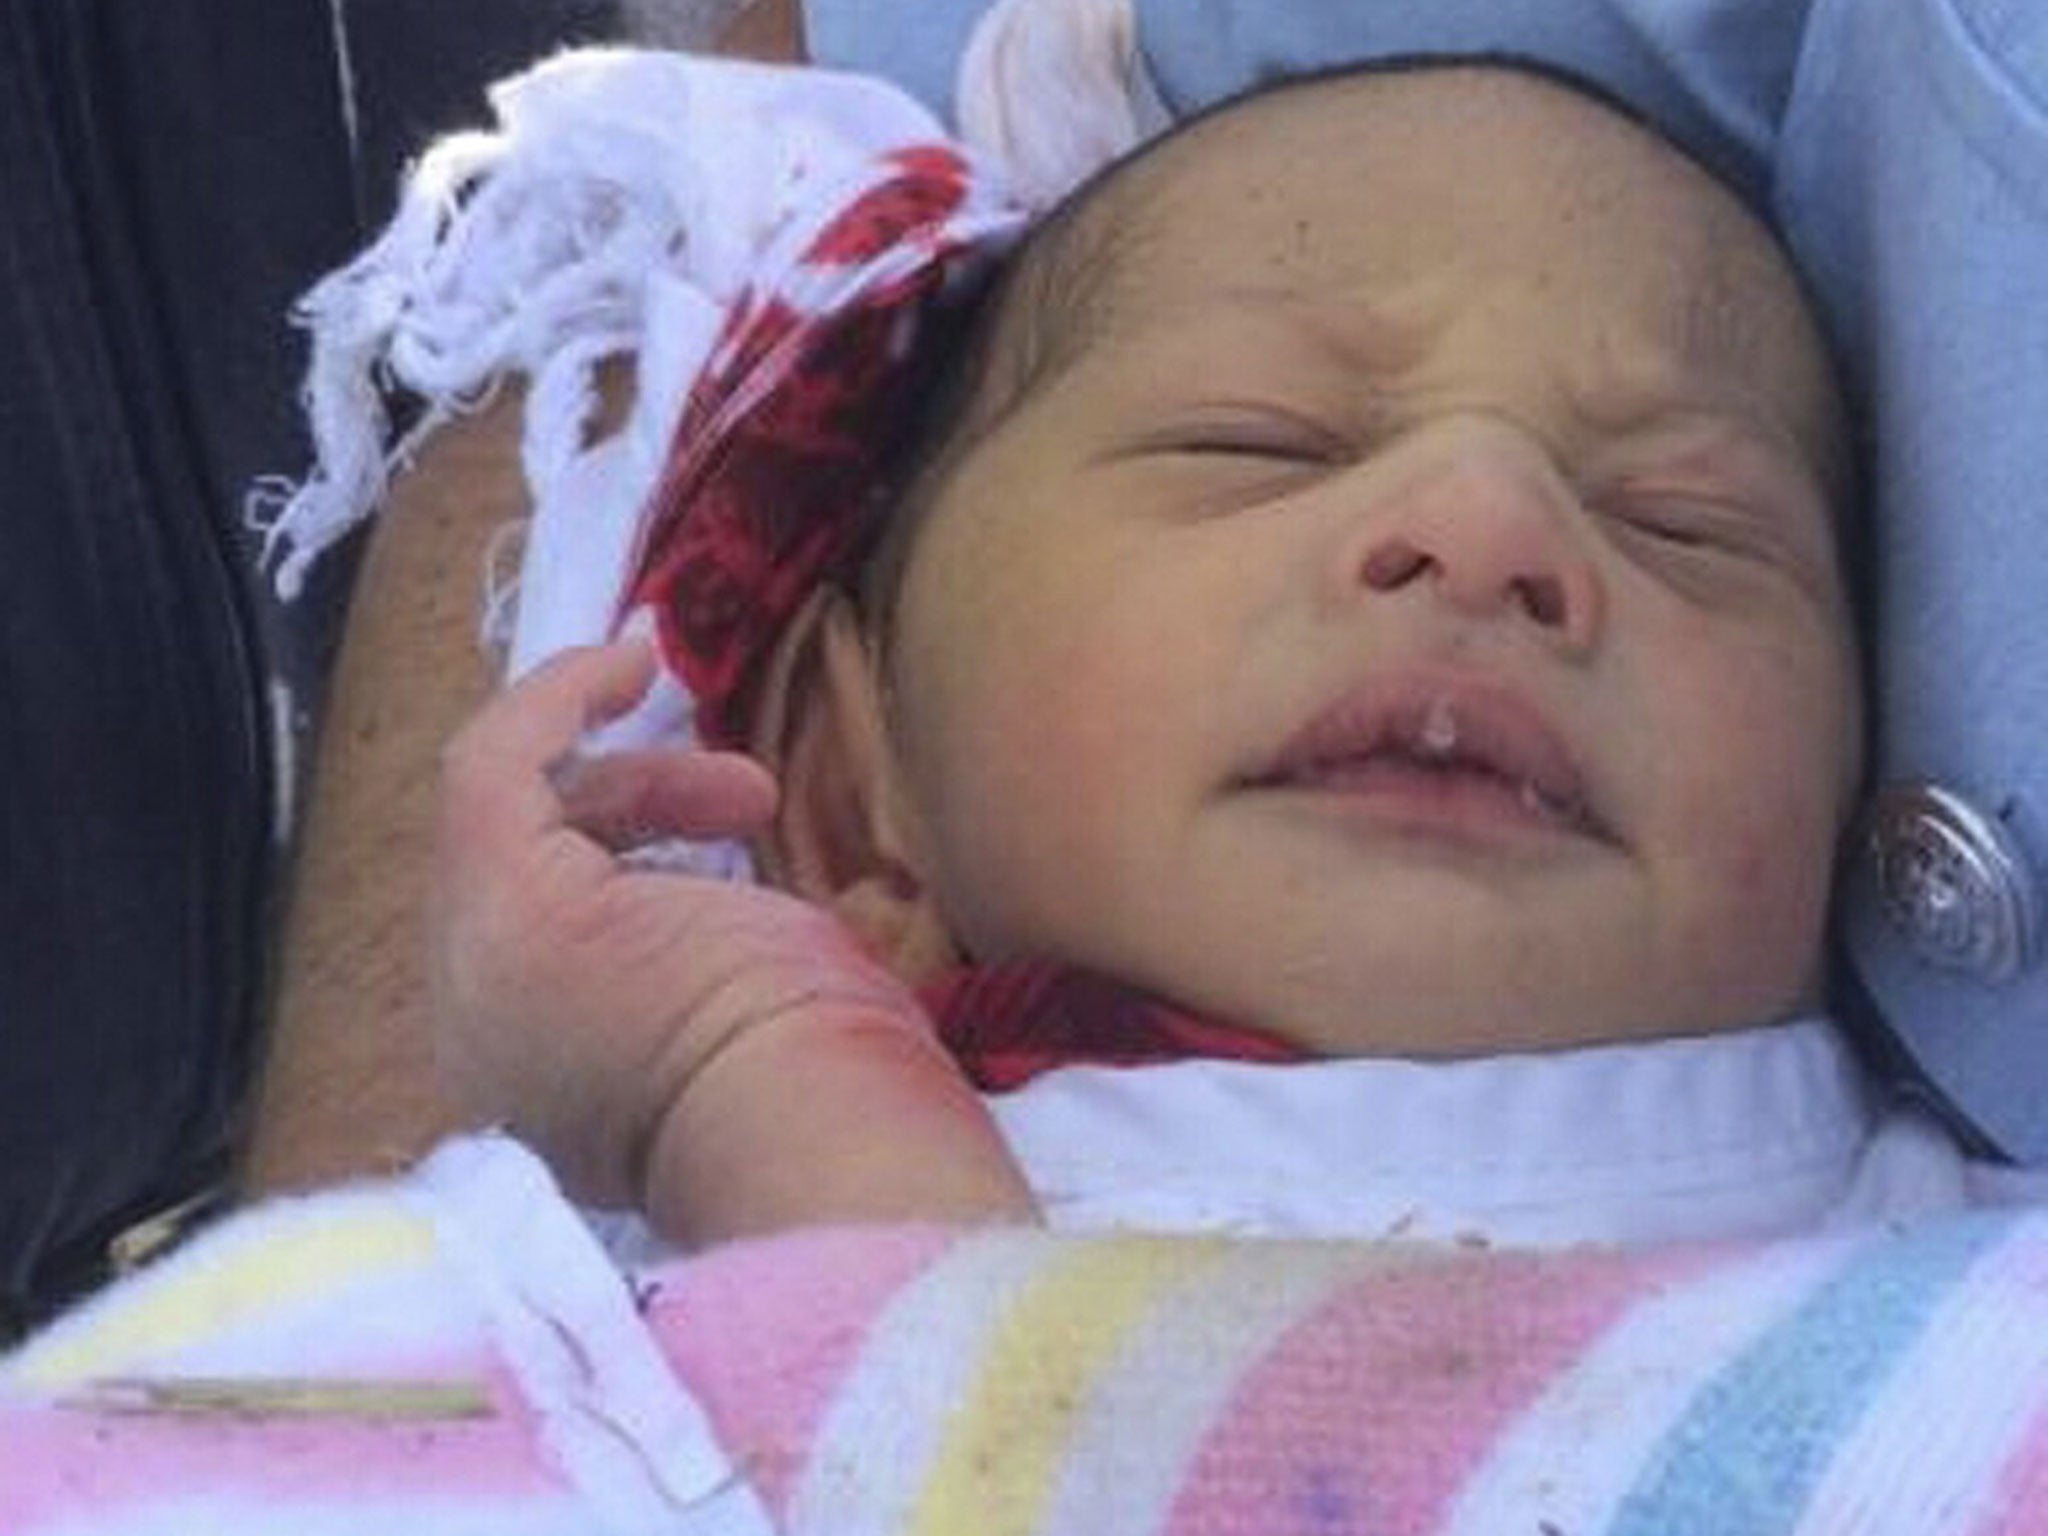 A newborn baby who was found abandoned in a drain in the Sydney suburb of Quakers Hill, Australia